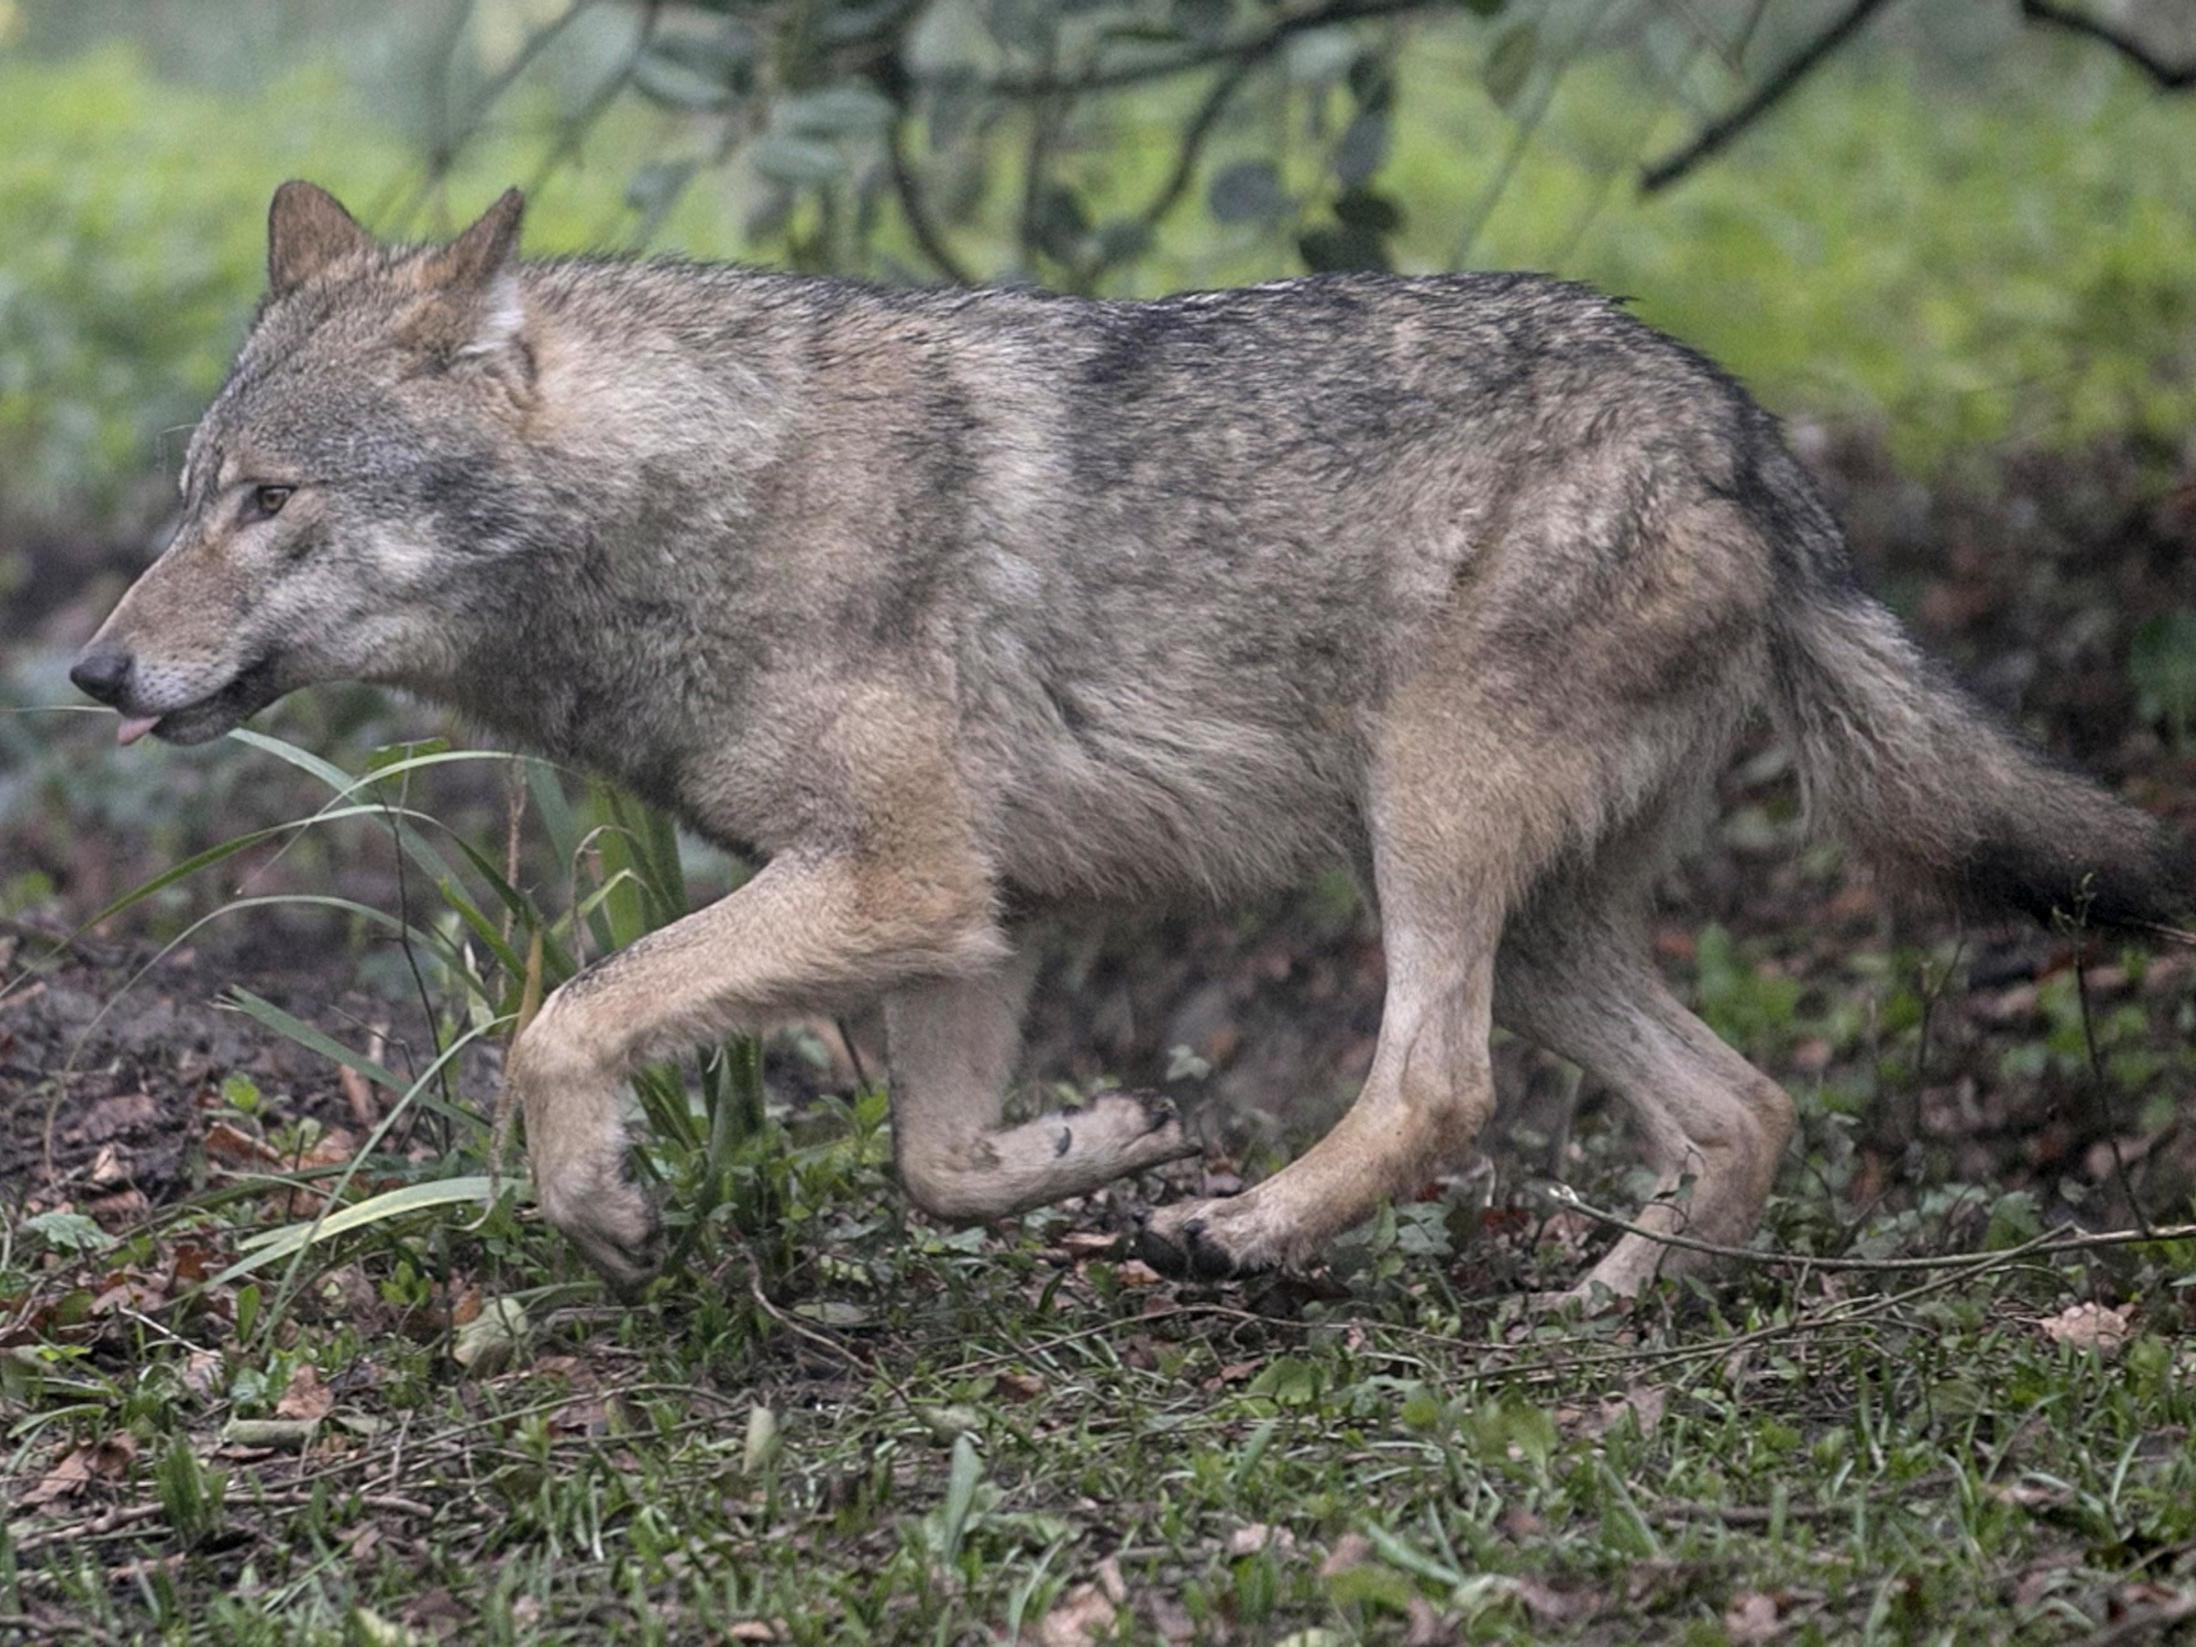 Wolves are a rare sight but are often shot when they are seen, say wildlife experts